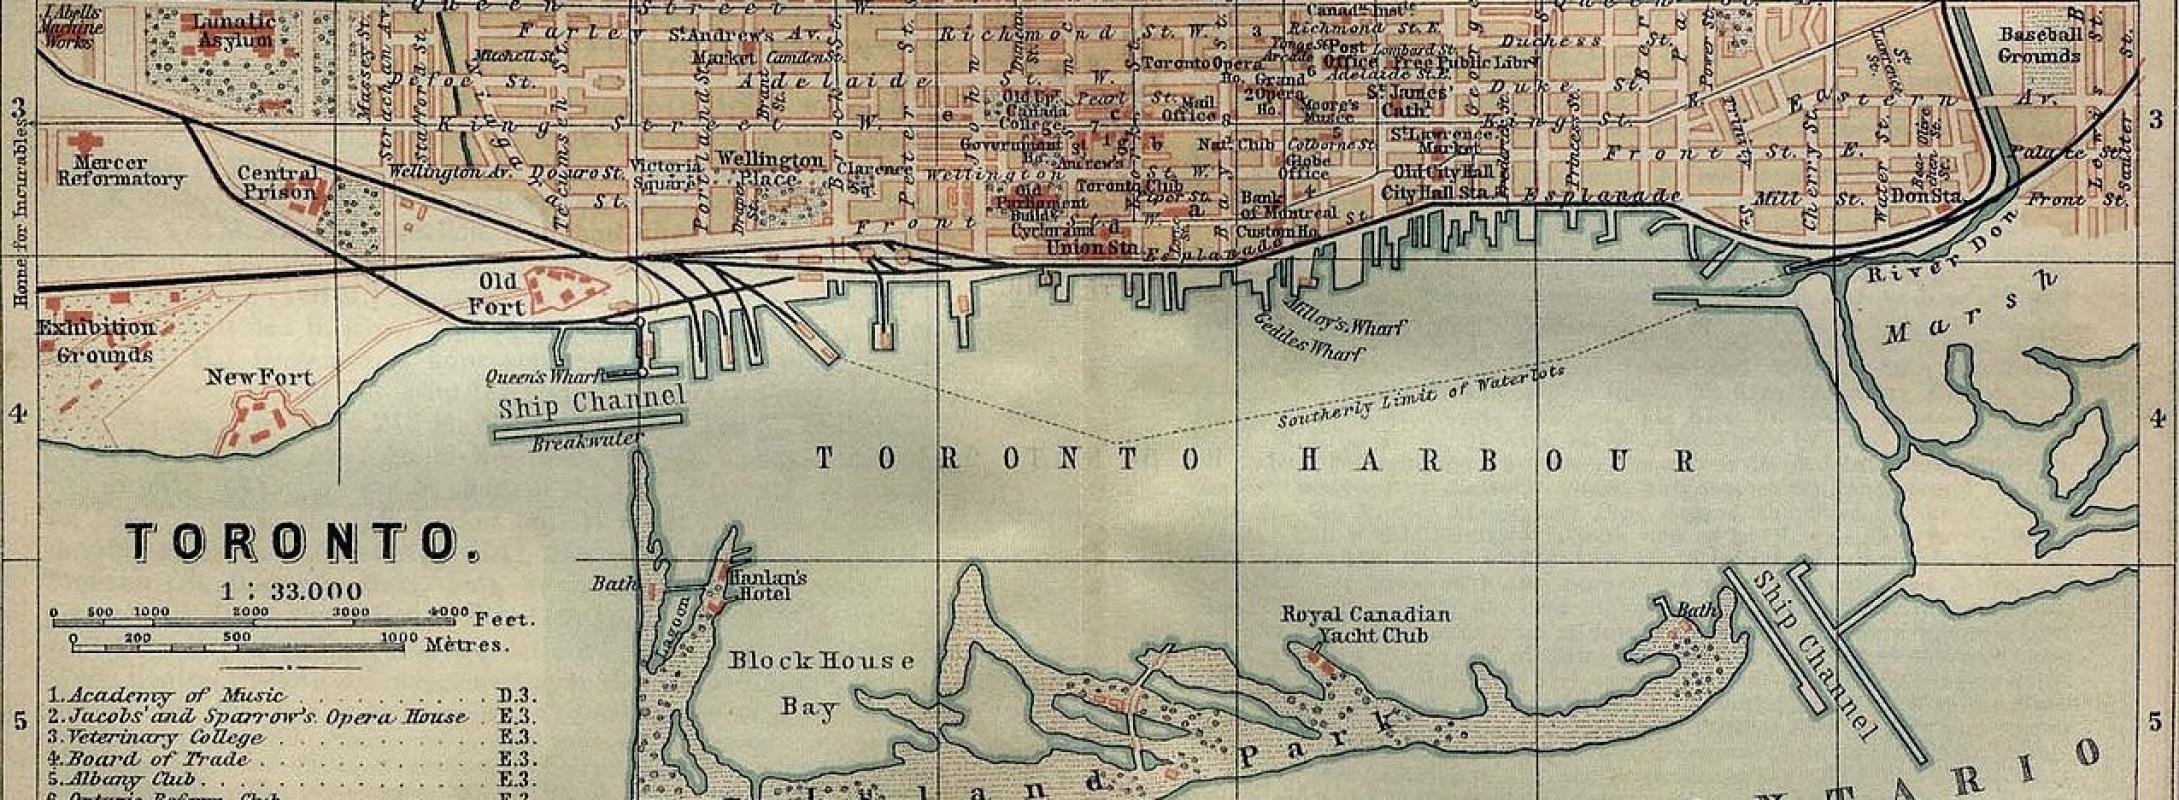 Illustrative historical map of the Port Lands from 1894 